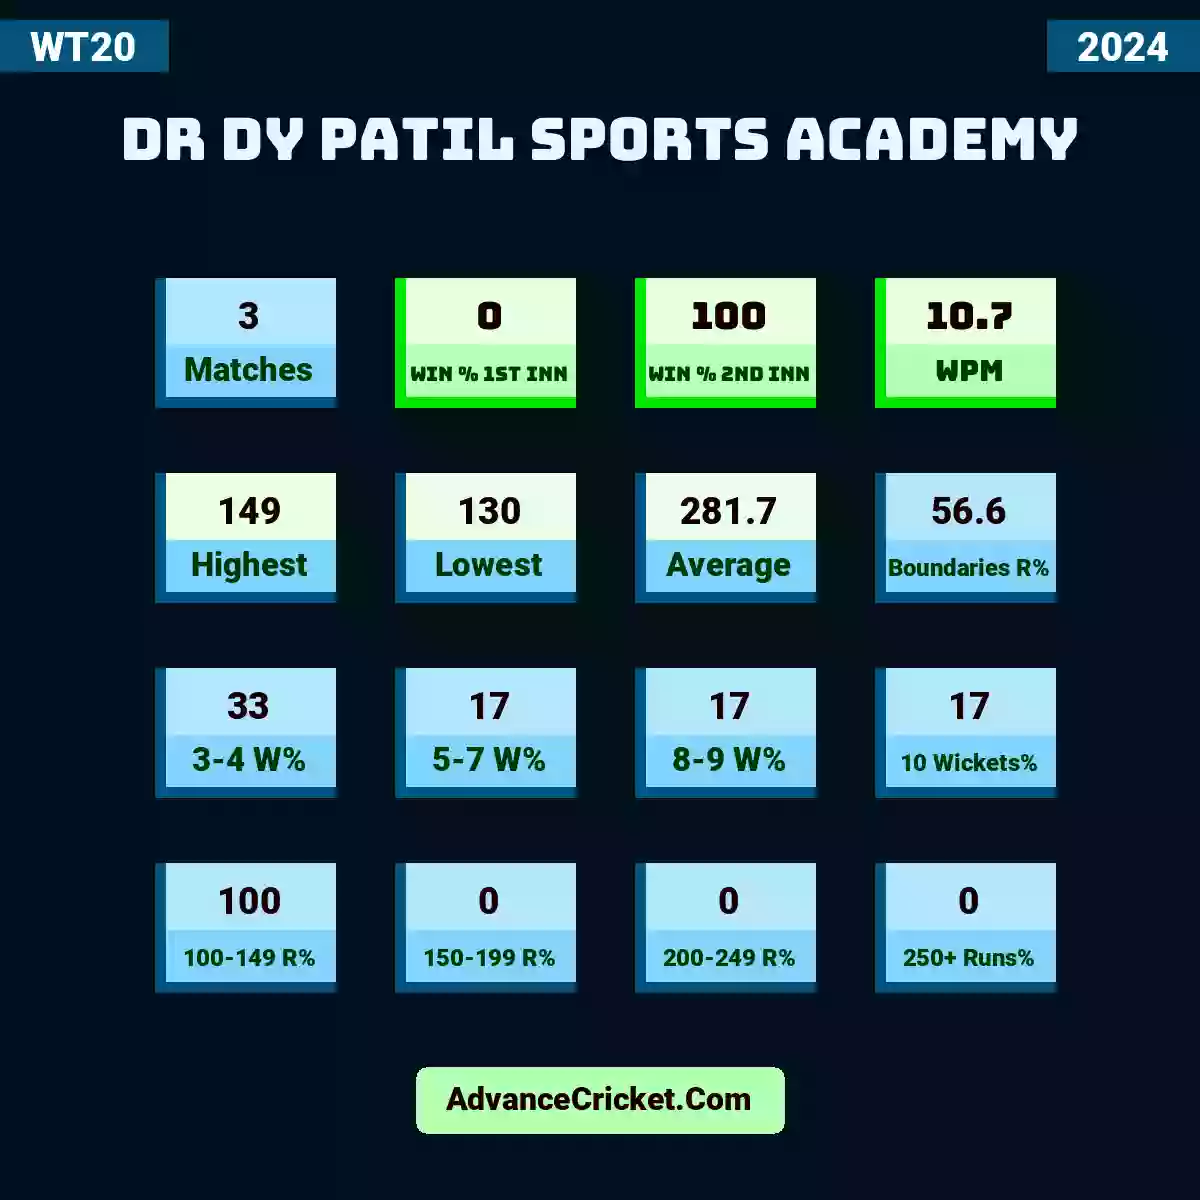 Image showing Dr DY Patil Sports Academy with Matches: 3, Win % 1st Inn: 0, Win % 2nd Inn: 100, WPM: 10.7, Highest: 149, Lowest: 130, Average: 281.7, Boundaries R%: 56.6, 3-4 W%: 33, 5-7 W%: 17, 8-9 W%: 17, 10 Wickets%: 17, 100-149 R%: 100, 150-199 R%: 0, 200-249 R%: 0, 250+ Runs%: 0.